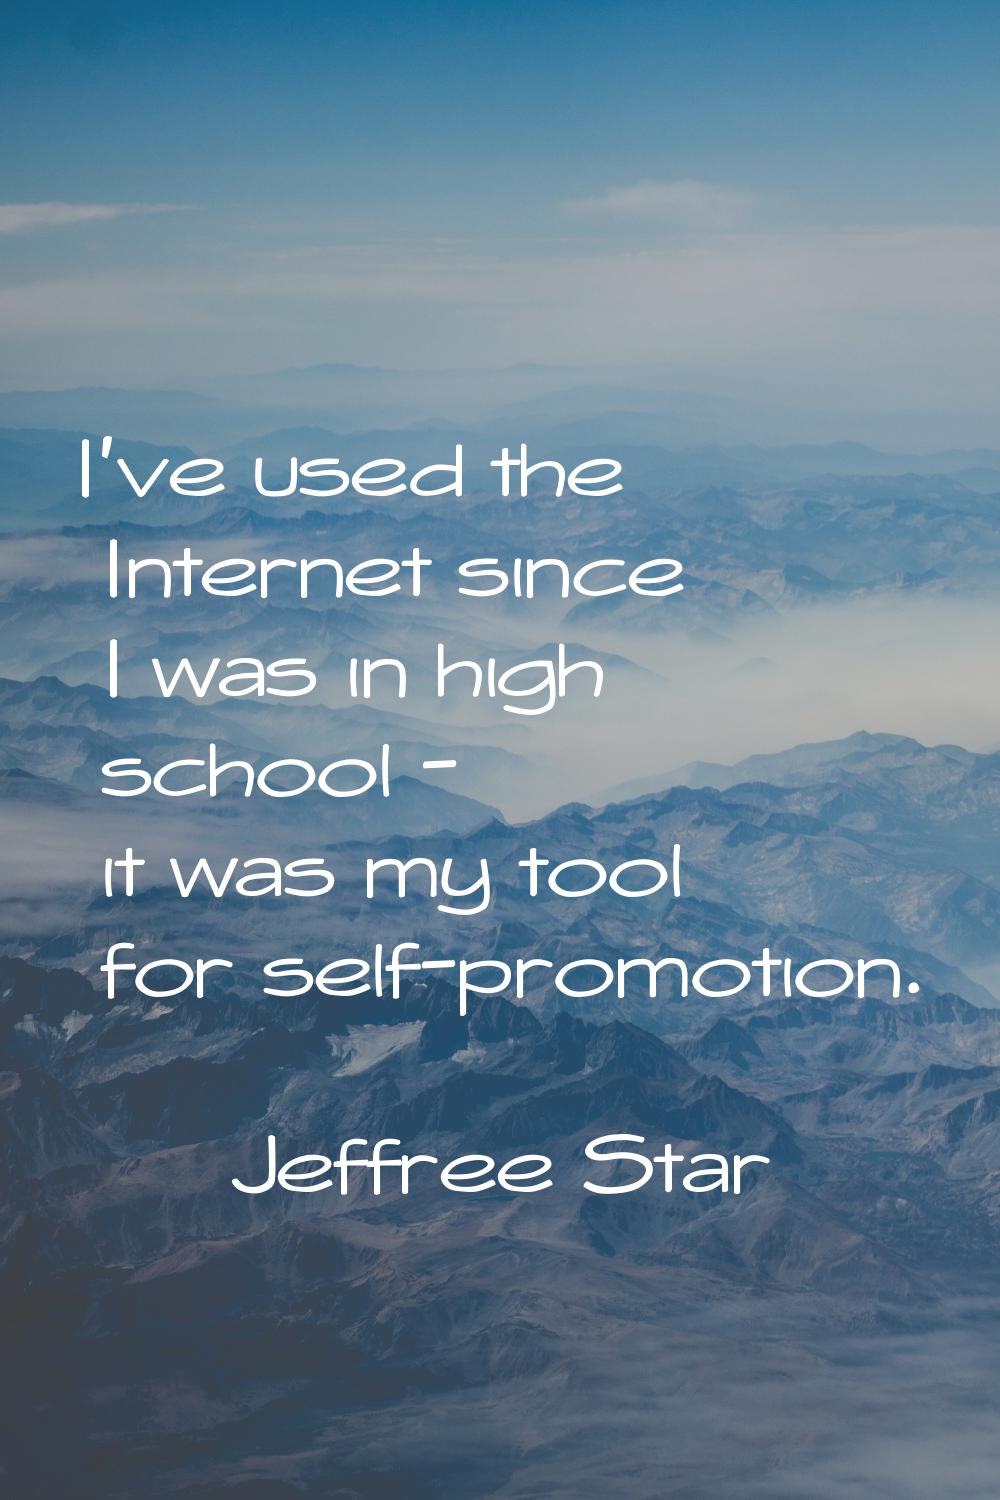 I've used the Internet since I was in high school - it was my tool for self-promotion.